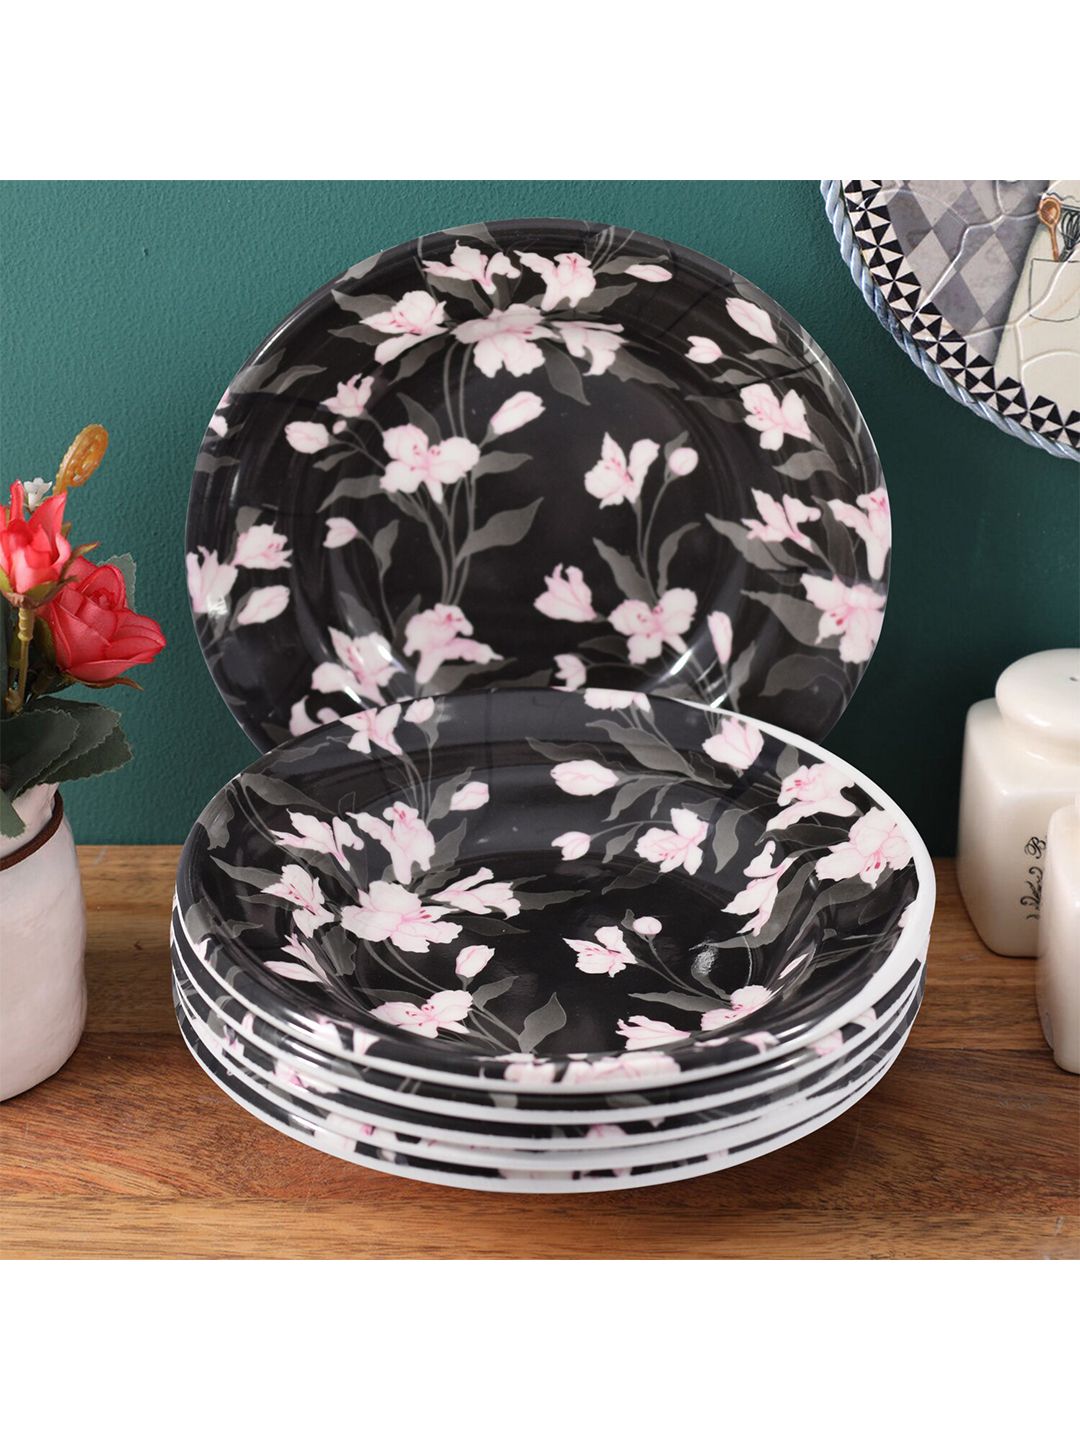 Gallery99 White & Black 6 Pieces Floral Printed Melamine Glossy Plates Price in India